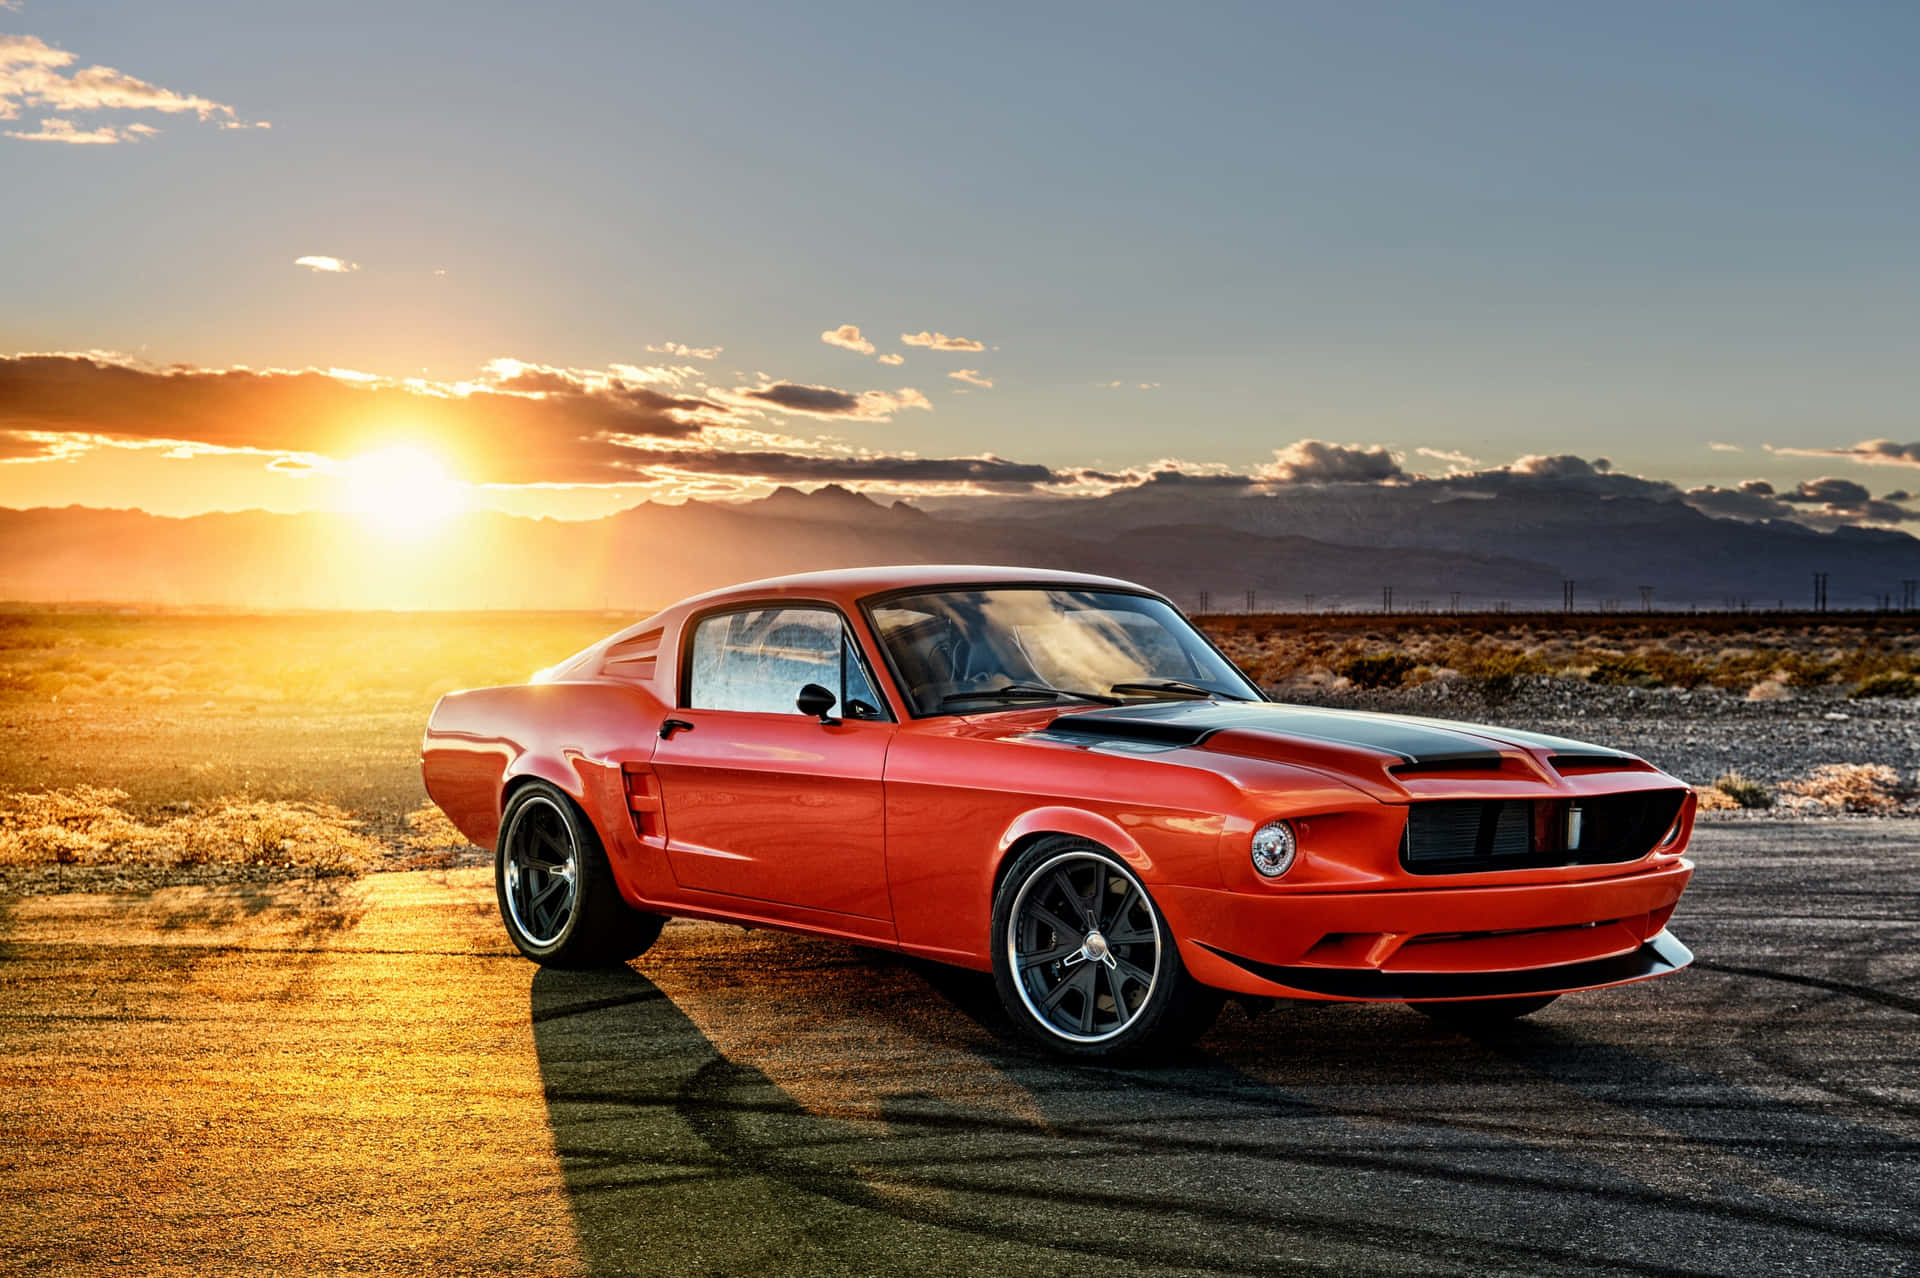 A Red Mustang Is Parked In The Desert At Sunset